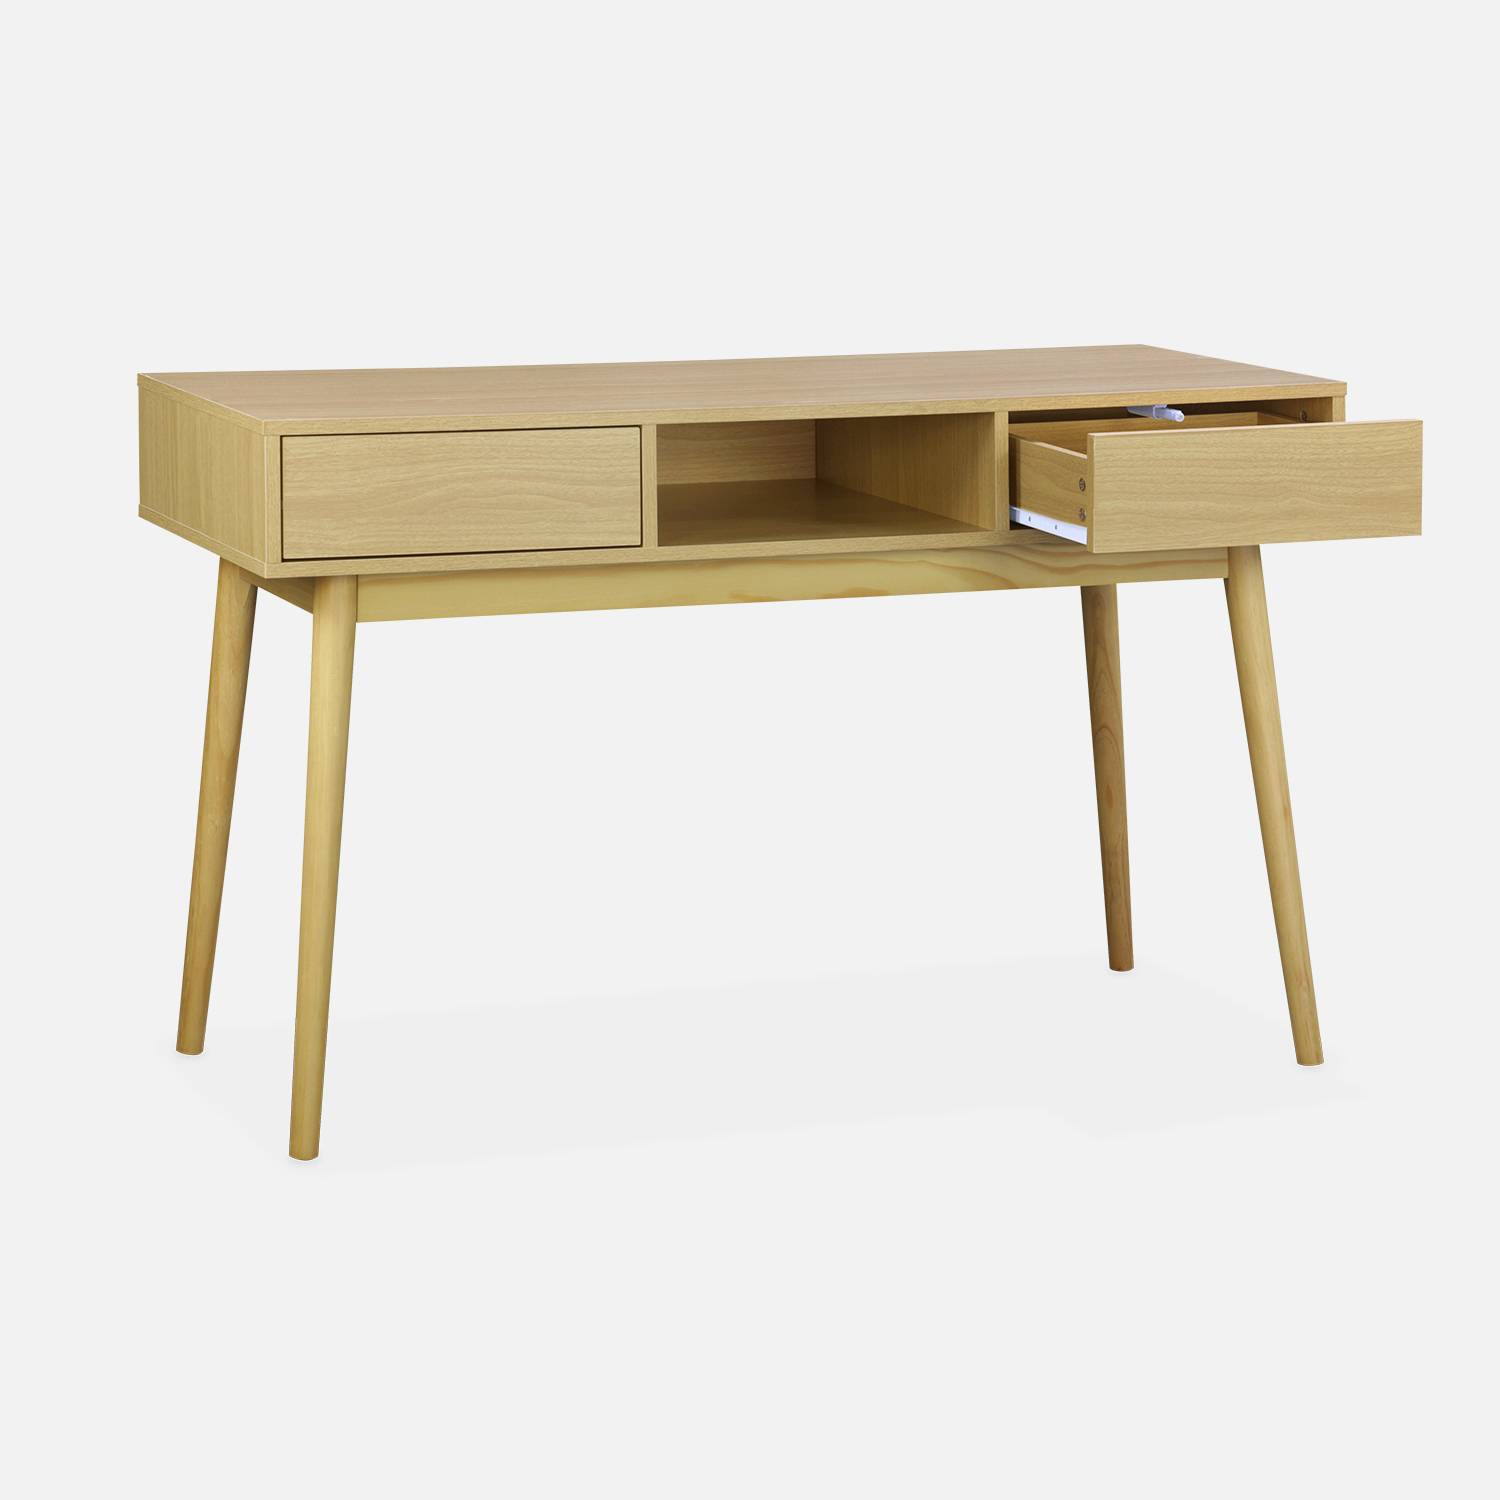 Wood-effect console table with two drawers and one storage nook, 120x48x75cm - Mika - Natural Wood colour,sweeek,Photo3